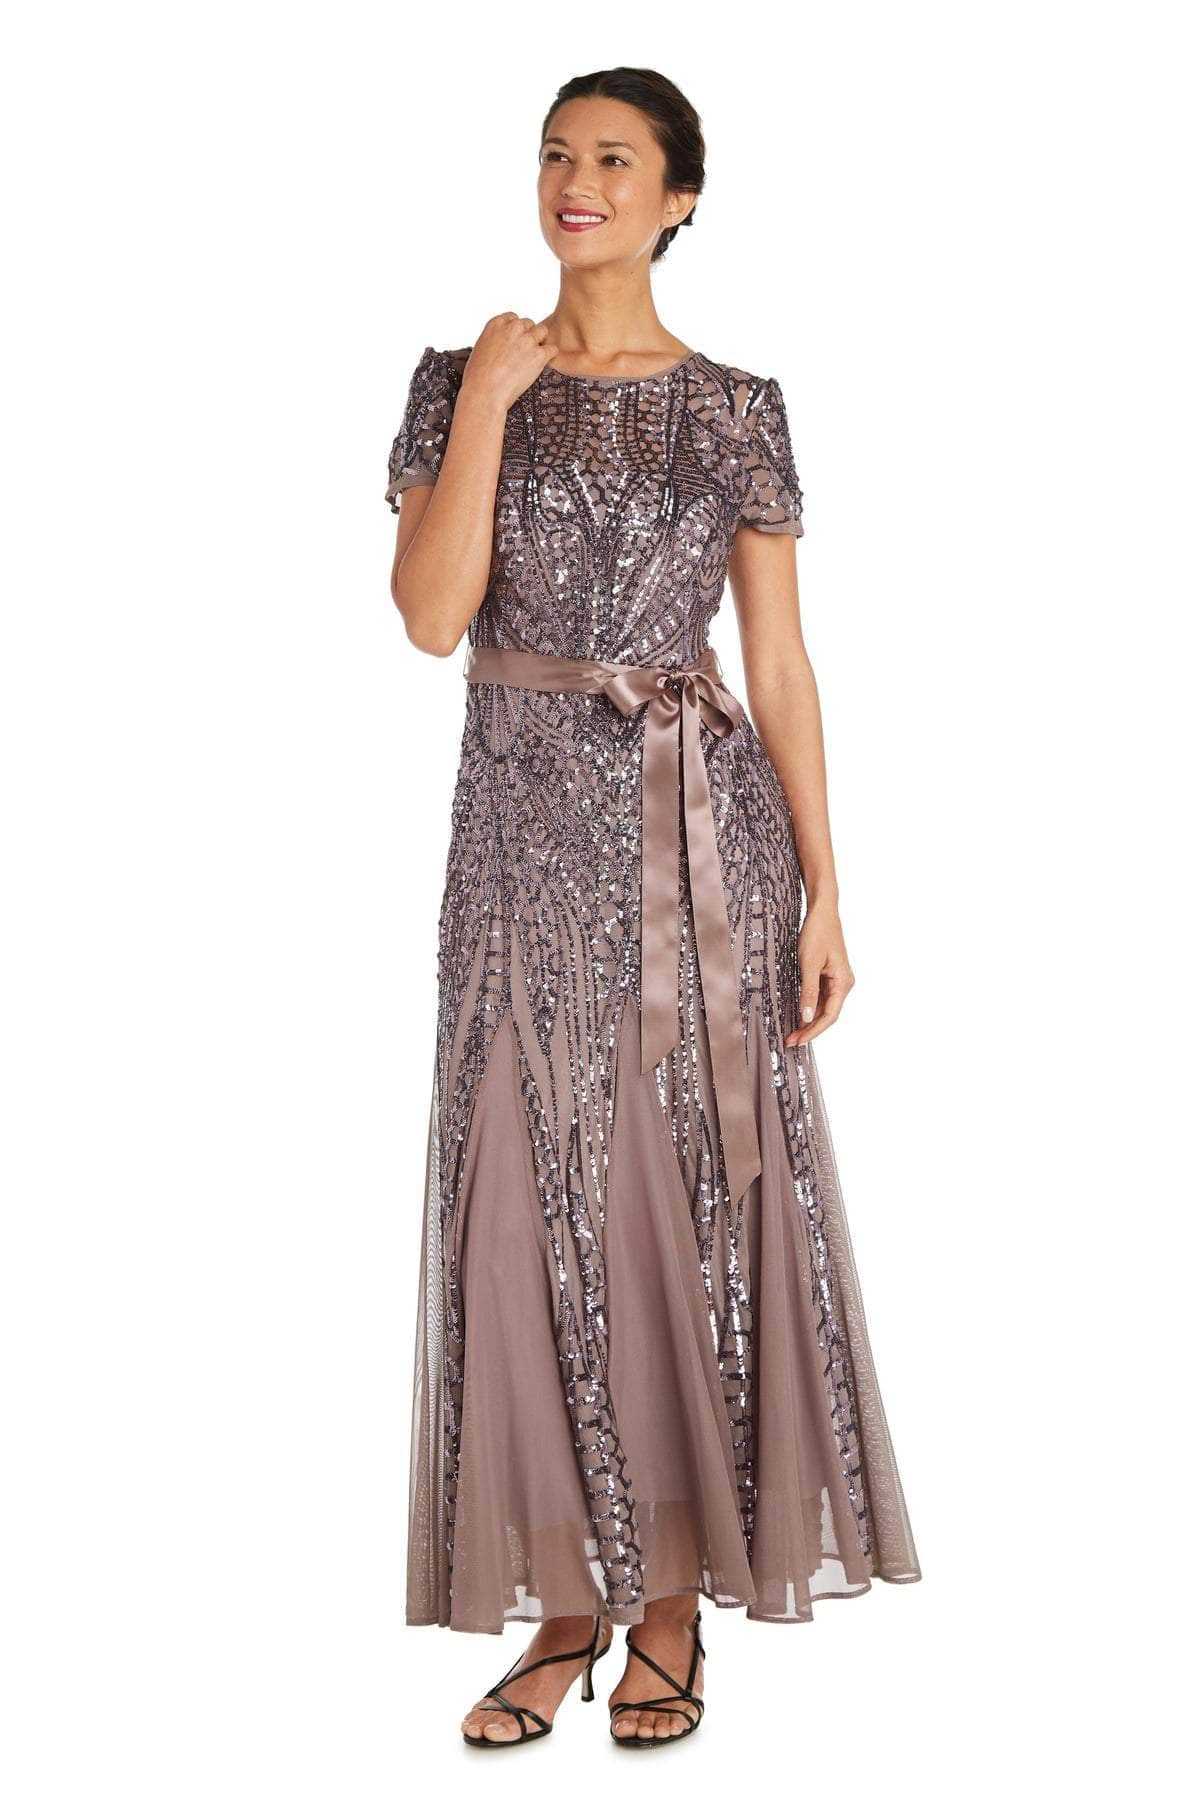 R&M Richards, R&M Richards - 1875W Plus Size Embellished Gown with Satin Waist Tie - 1 pc Mocha In Size 16W Available